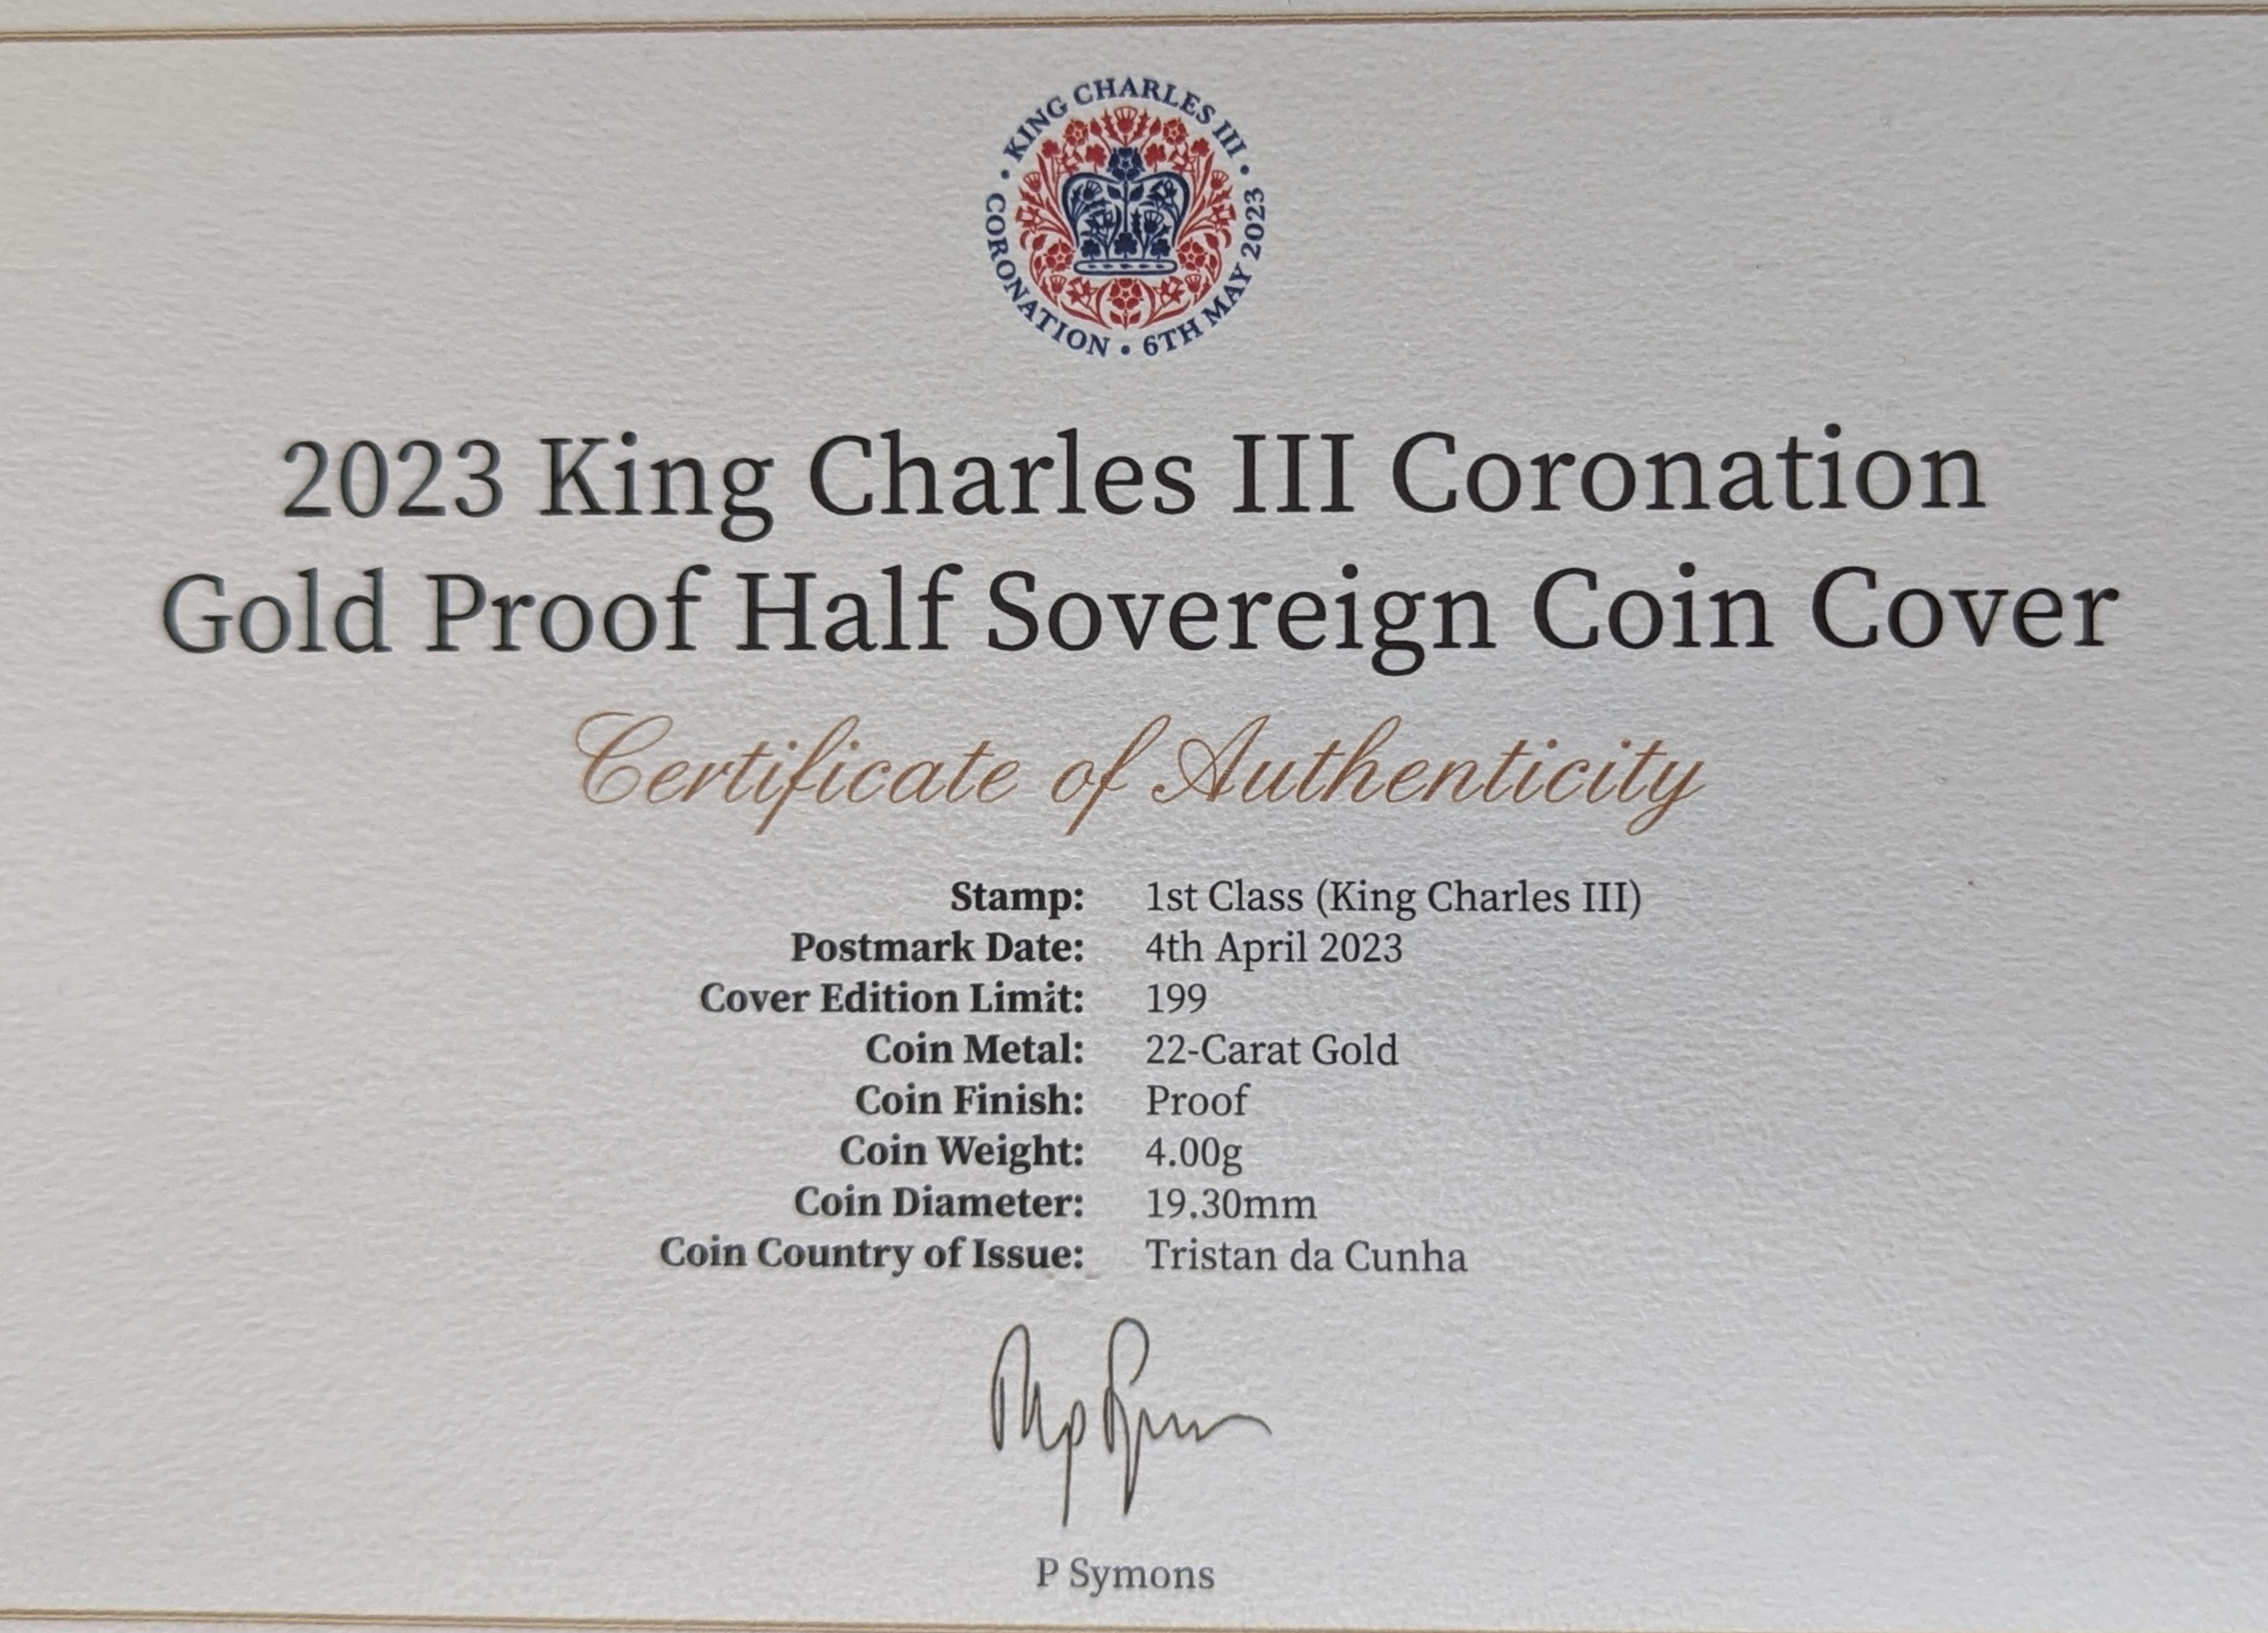 A Harrington & Byrne 2023 King Charles III Coronation Gold Proof Half Sovereign Coin Cover, with COA - Image 2 of 3